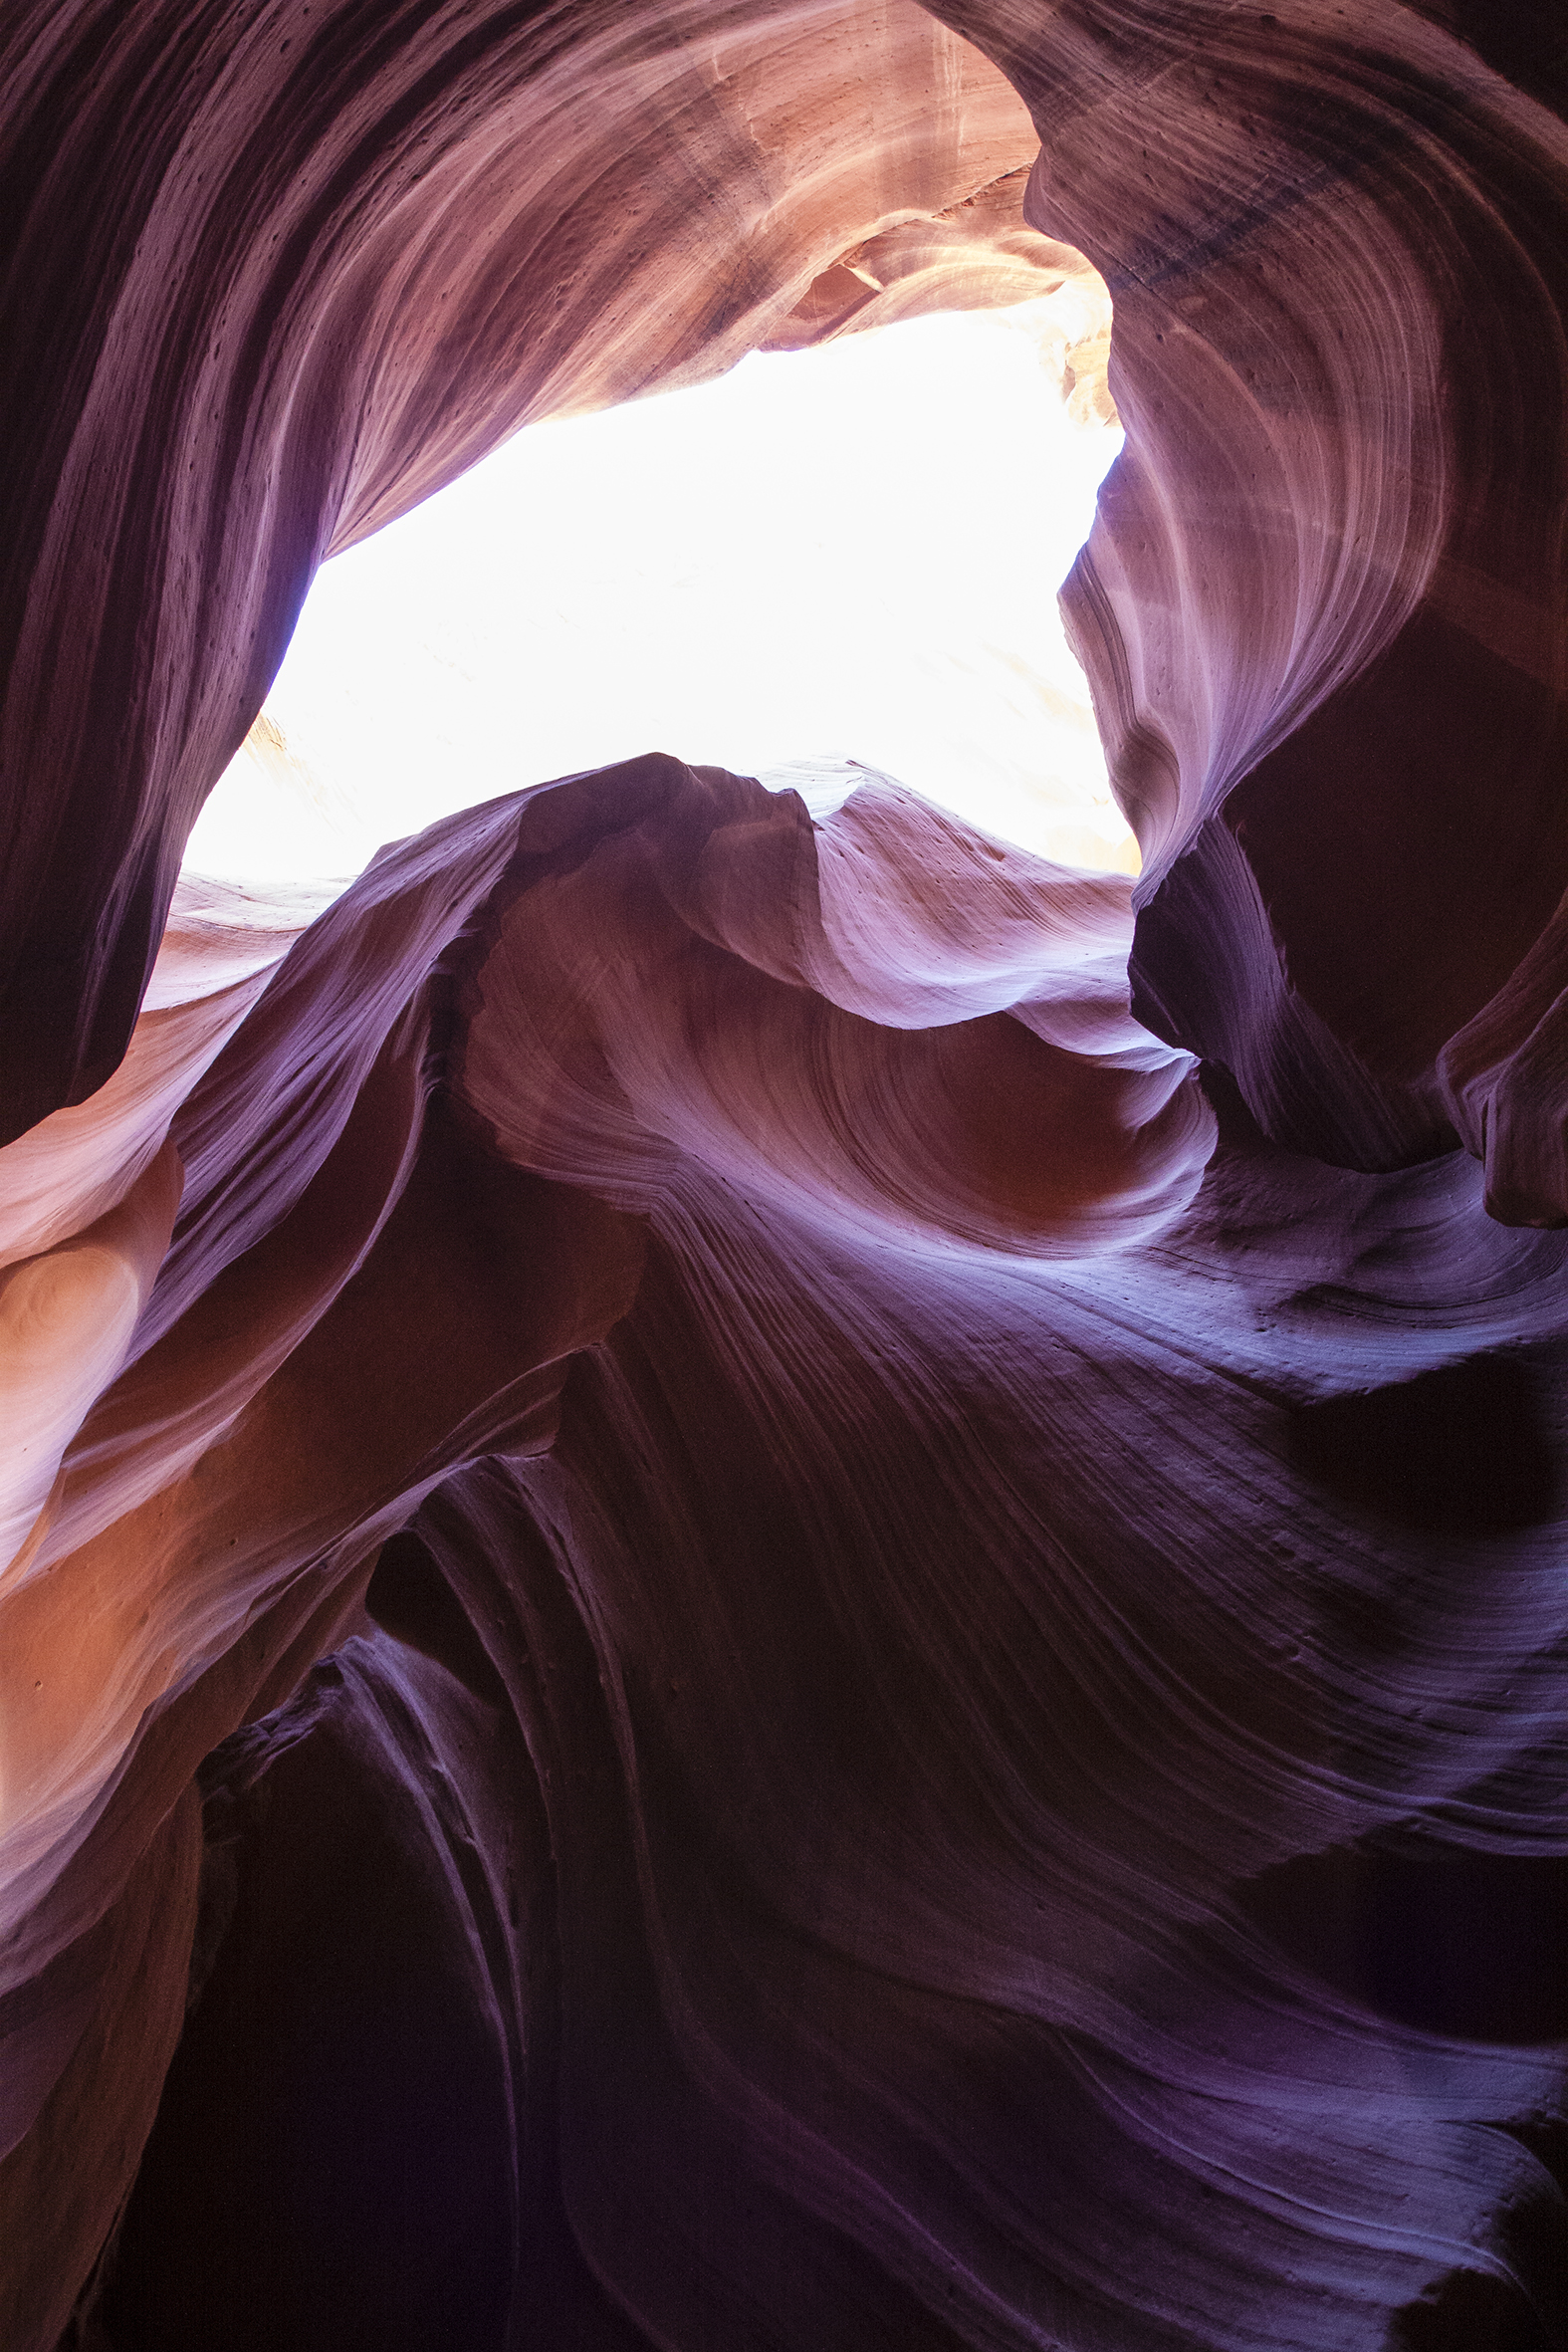 naturaliste-antelope-canyon-reserve-navajo-usa-ouest-2012-marie-colette-becker-03